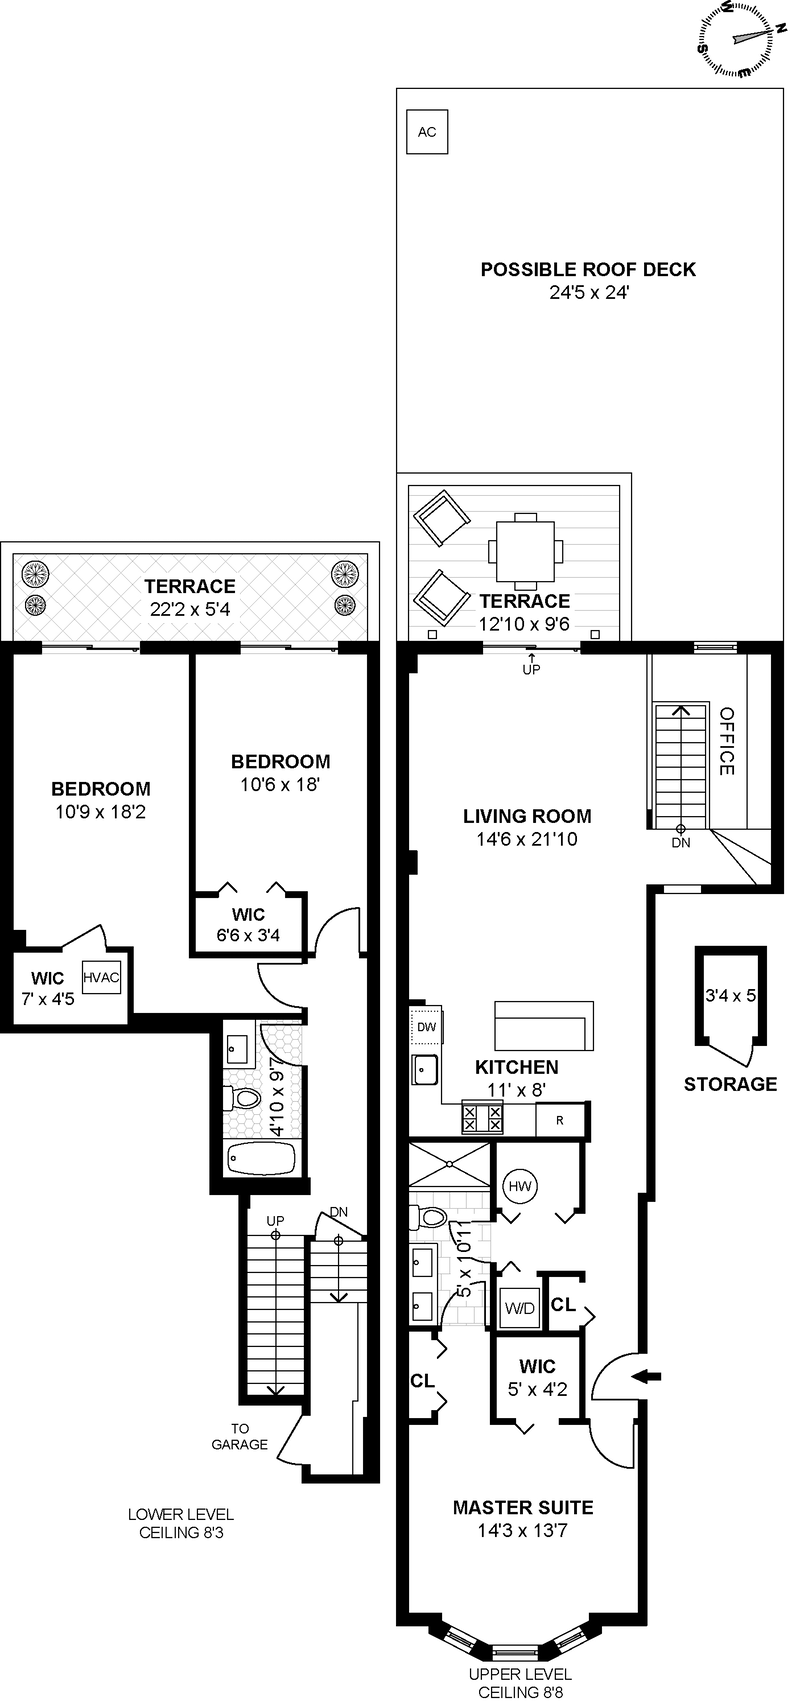 Floorplan for 206 Willow Ave, 1